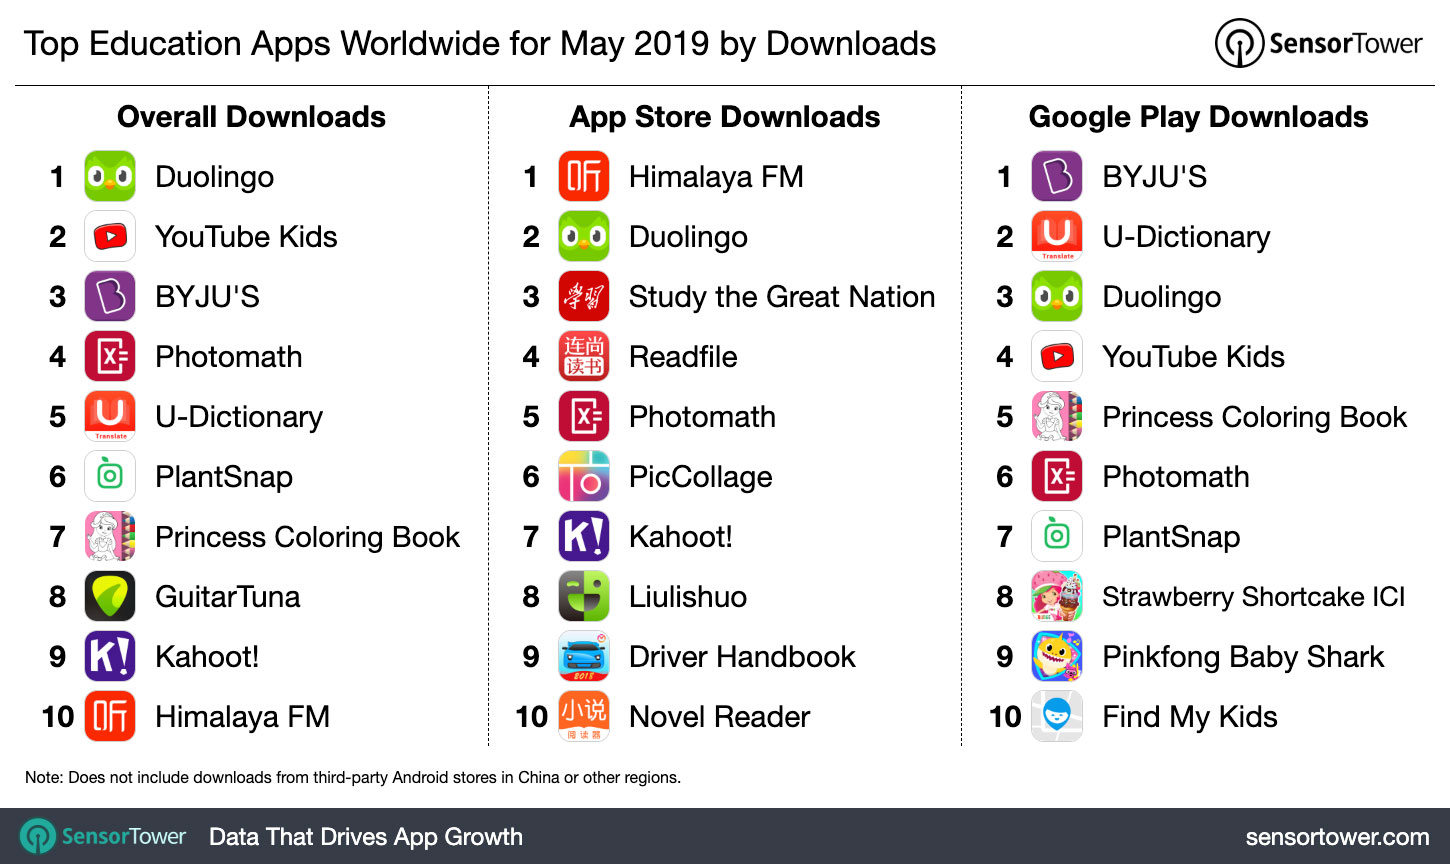 Top Education Apps Worldwide for May 2019 by Downloads